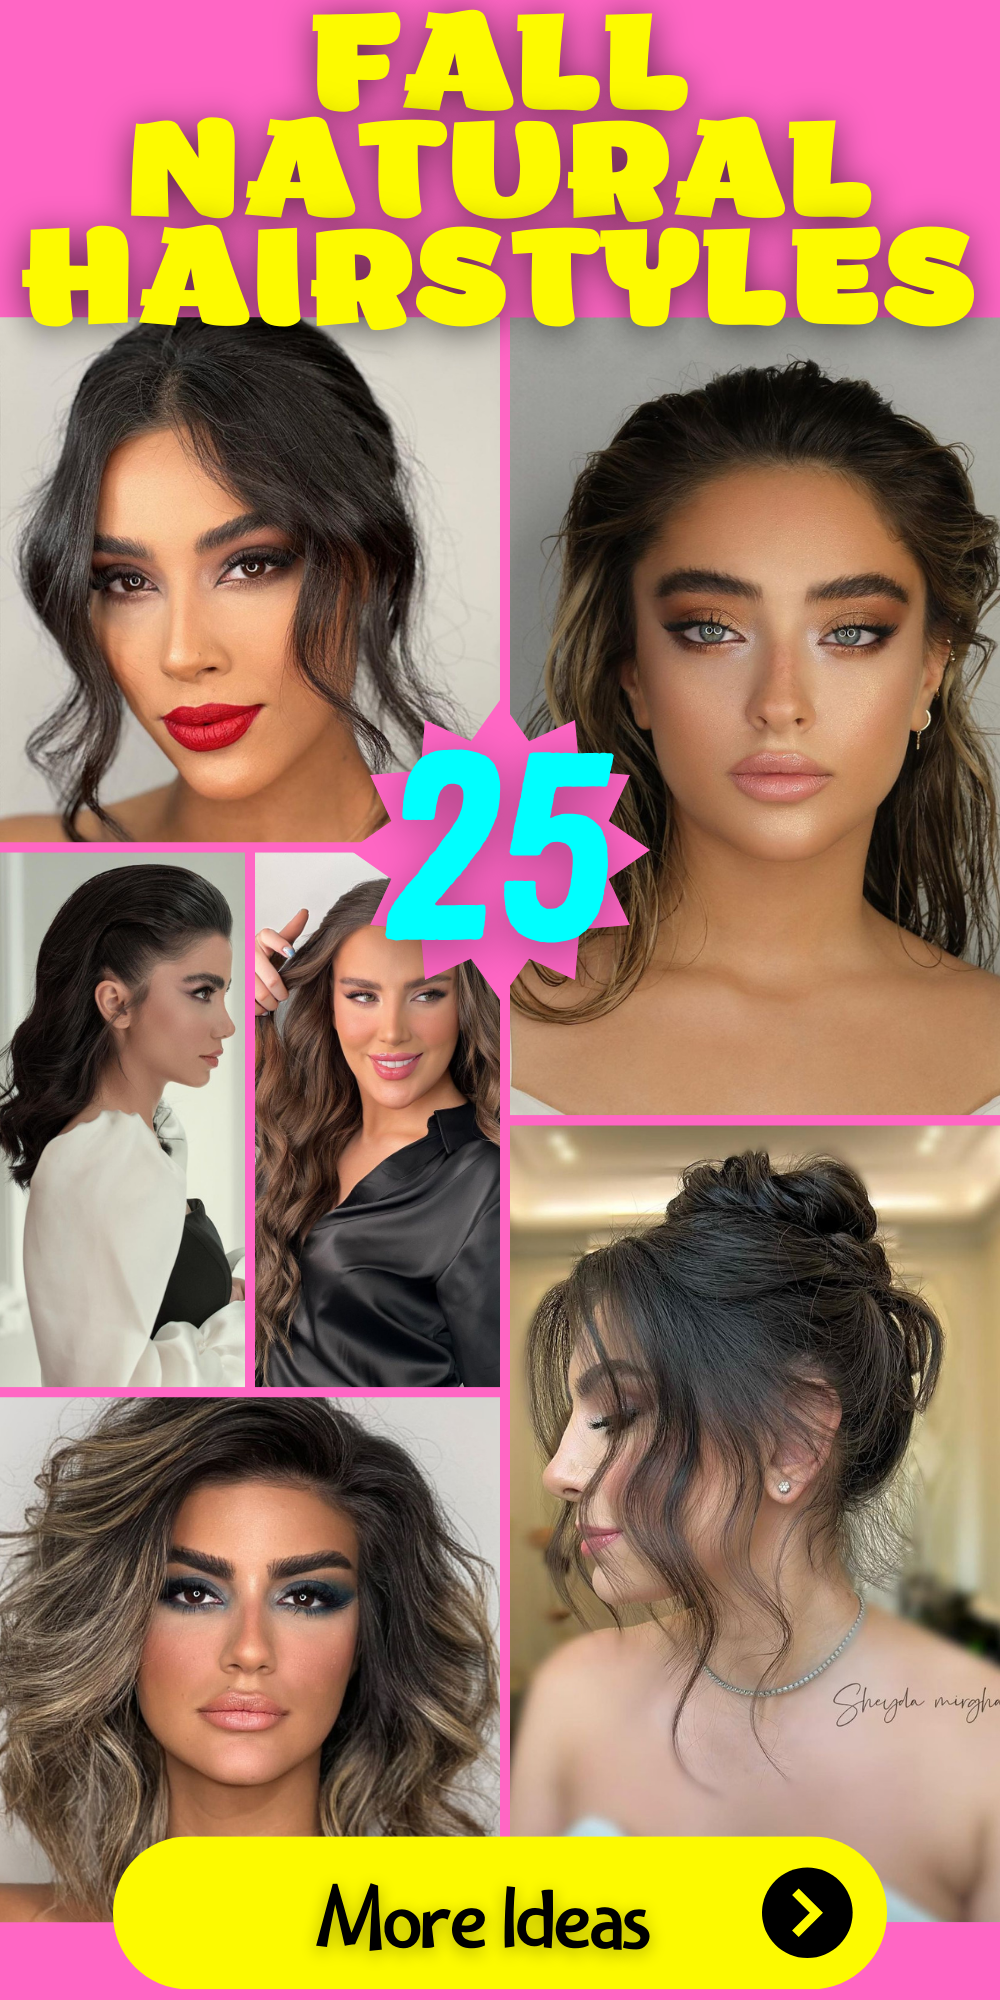 Fall Natural Hairstyles: 25 Ideas to Embrace Your Natural Beauty This Season